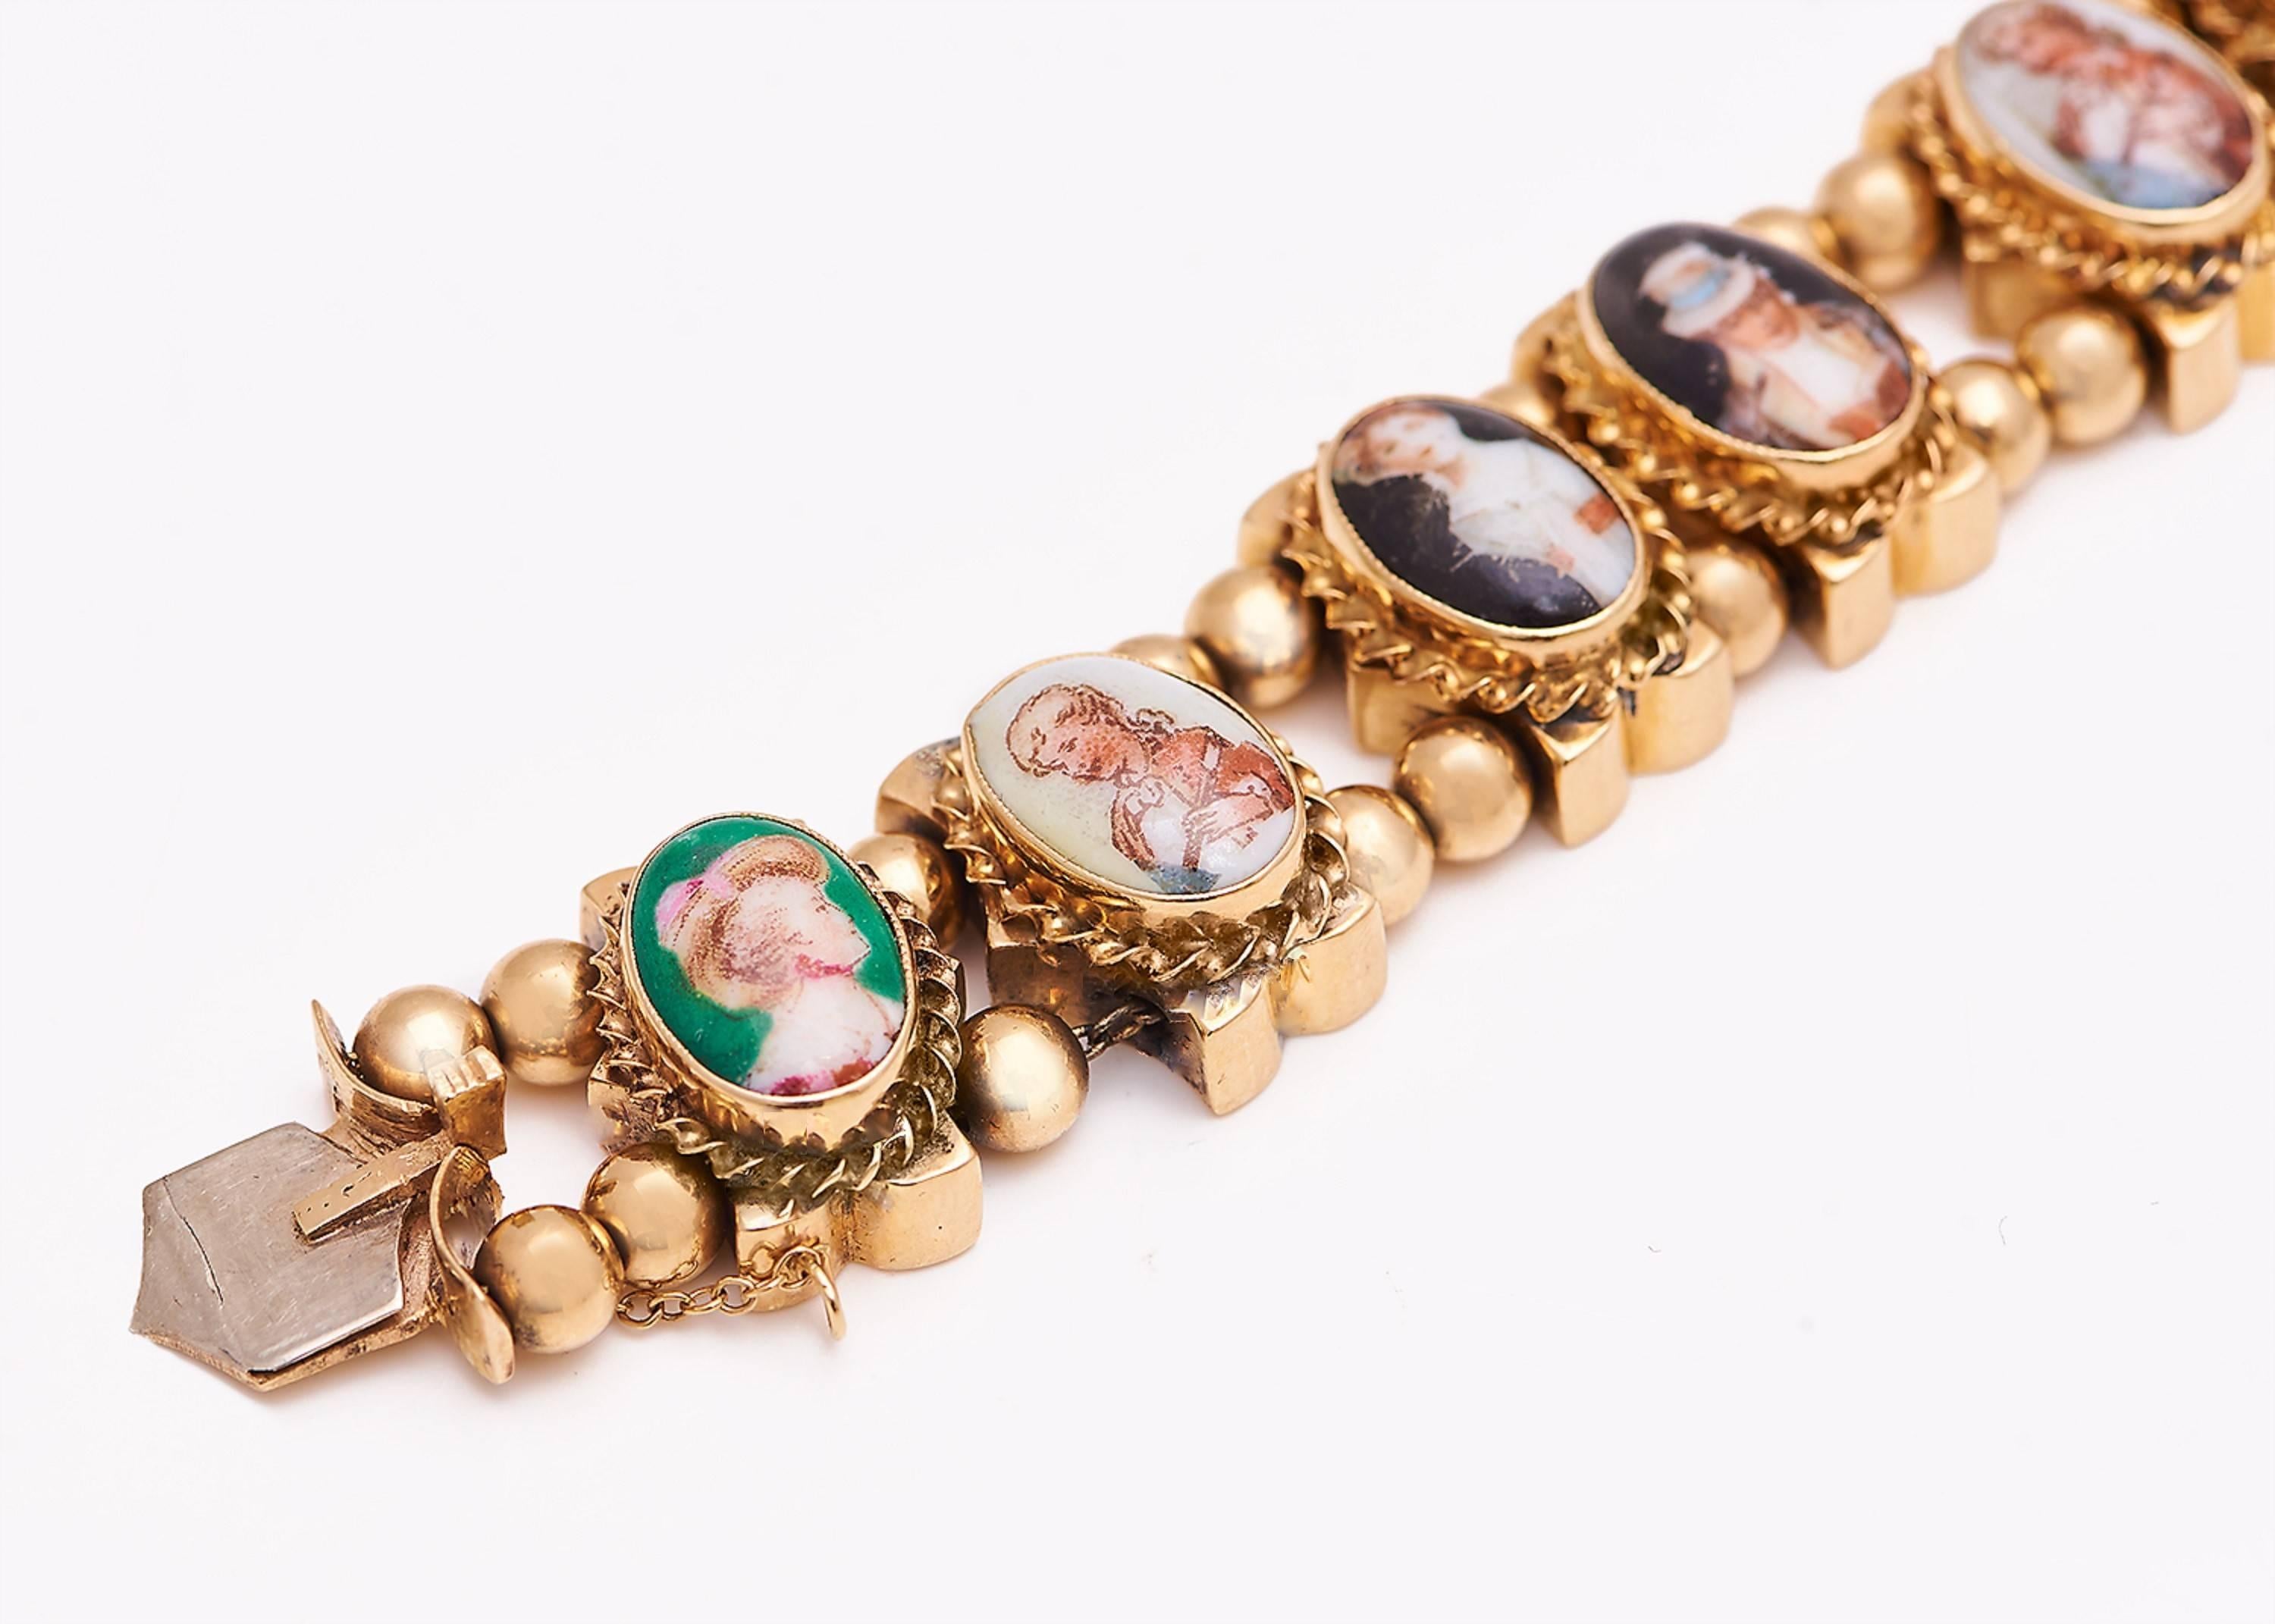 Unique 14 karat gold slide and bead bracelet. Featuring individual ovals of bezel-set porcelain, hand-painted with different men and women's portraits. Appears to be old, but age unknown. 

Measures 7 3/4 inches long.